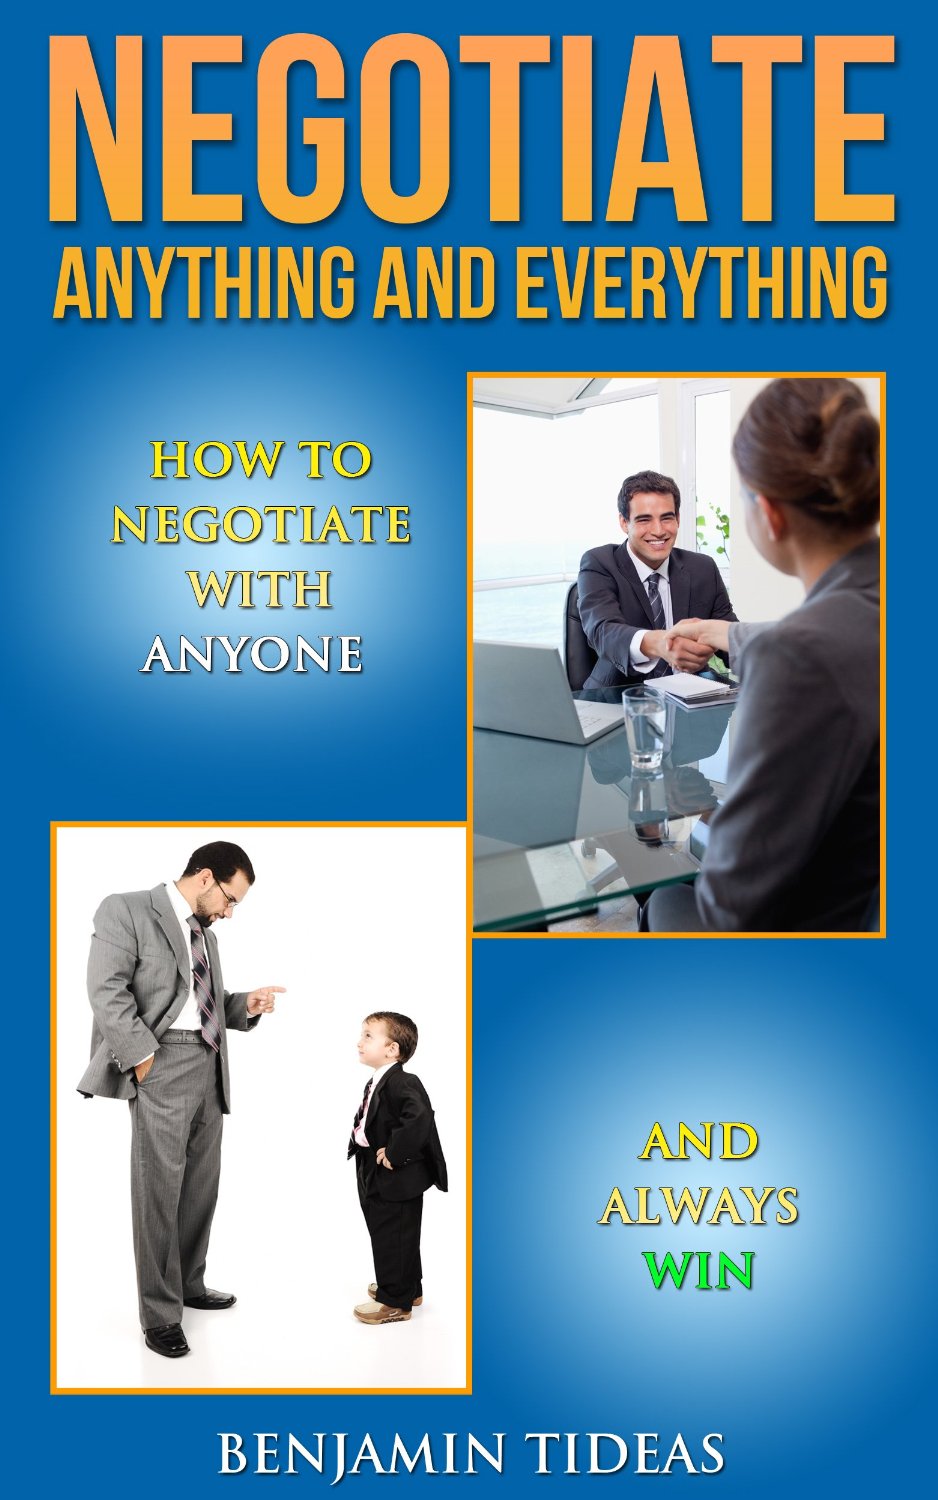 Negotiate Anything and Everything: How To Negotiate With Anyone and Always Win by Benjamin Tideas